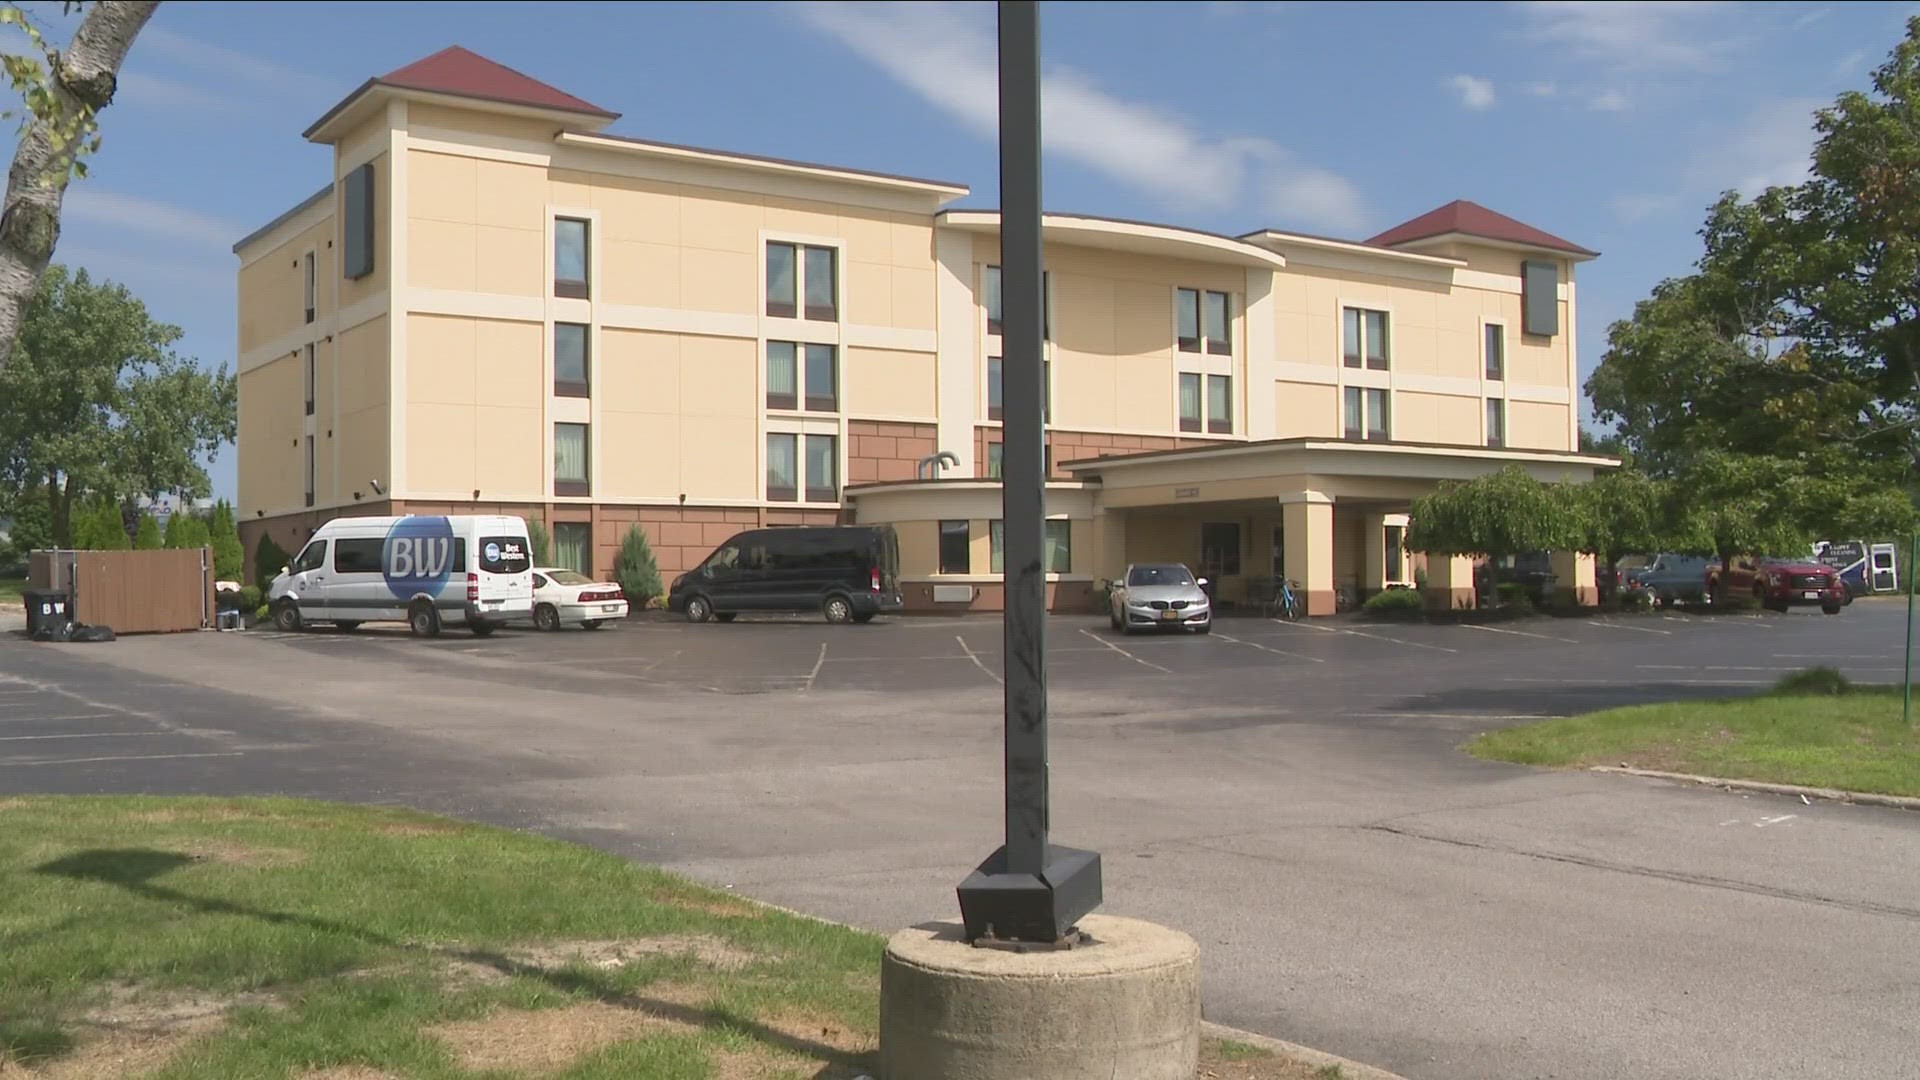 Cheektowaga legal case to restrict migrants at hotels